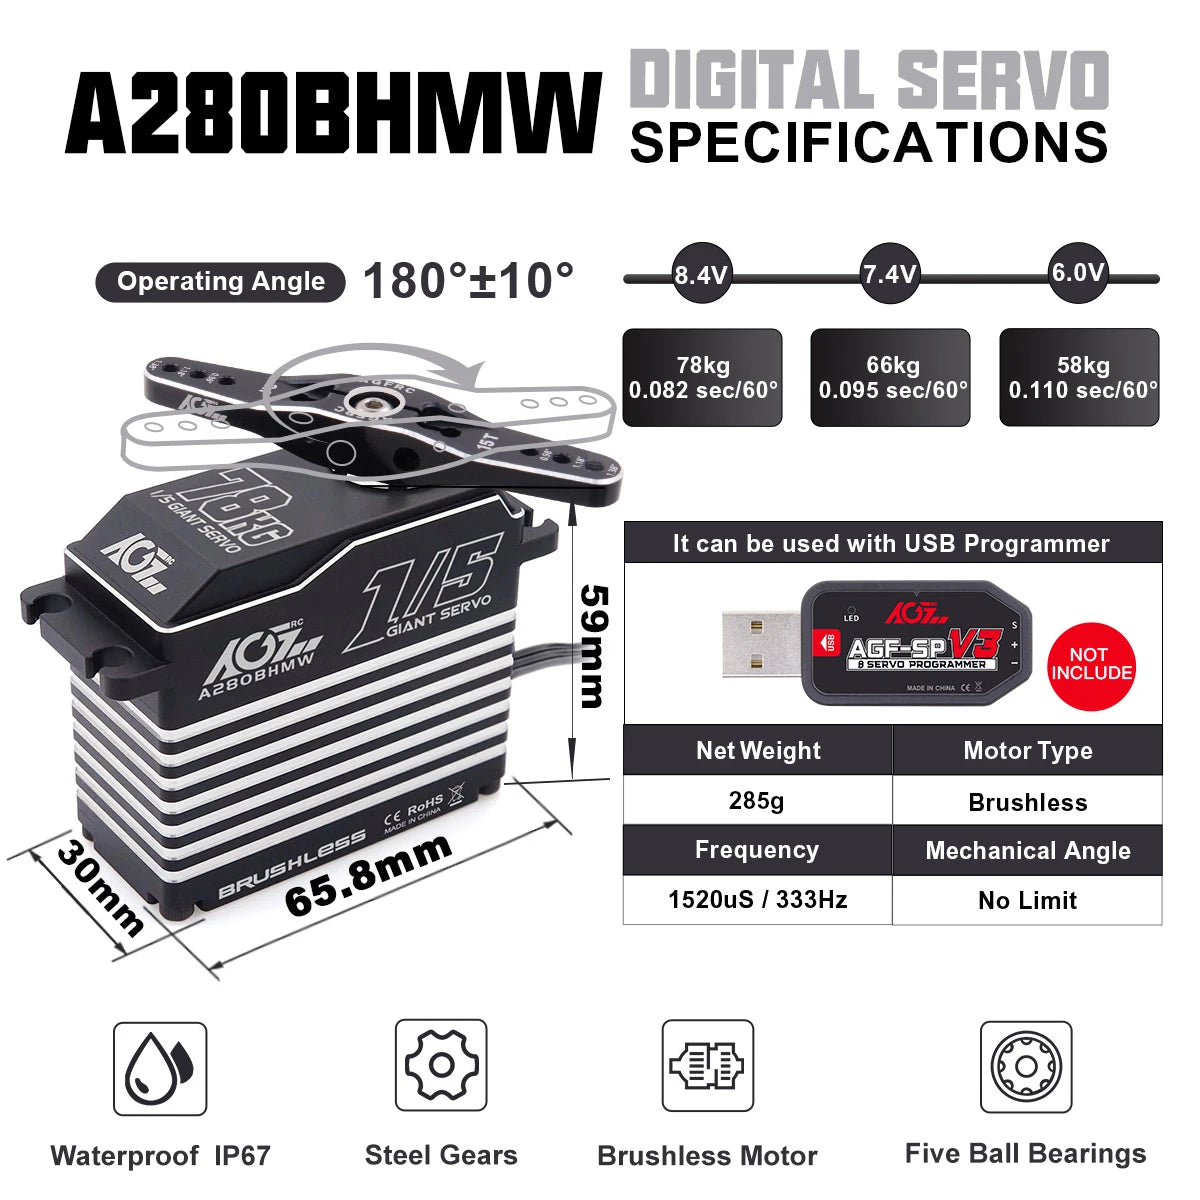 AZBBHMW SPECIFICATIONS Operating Angle 1809+108 8.4